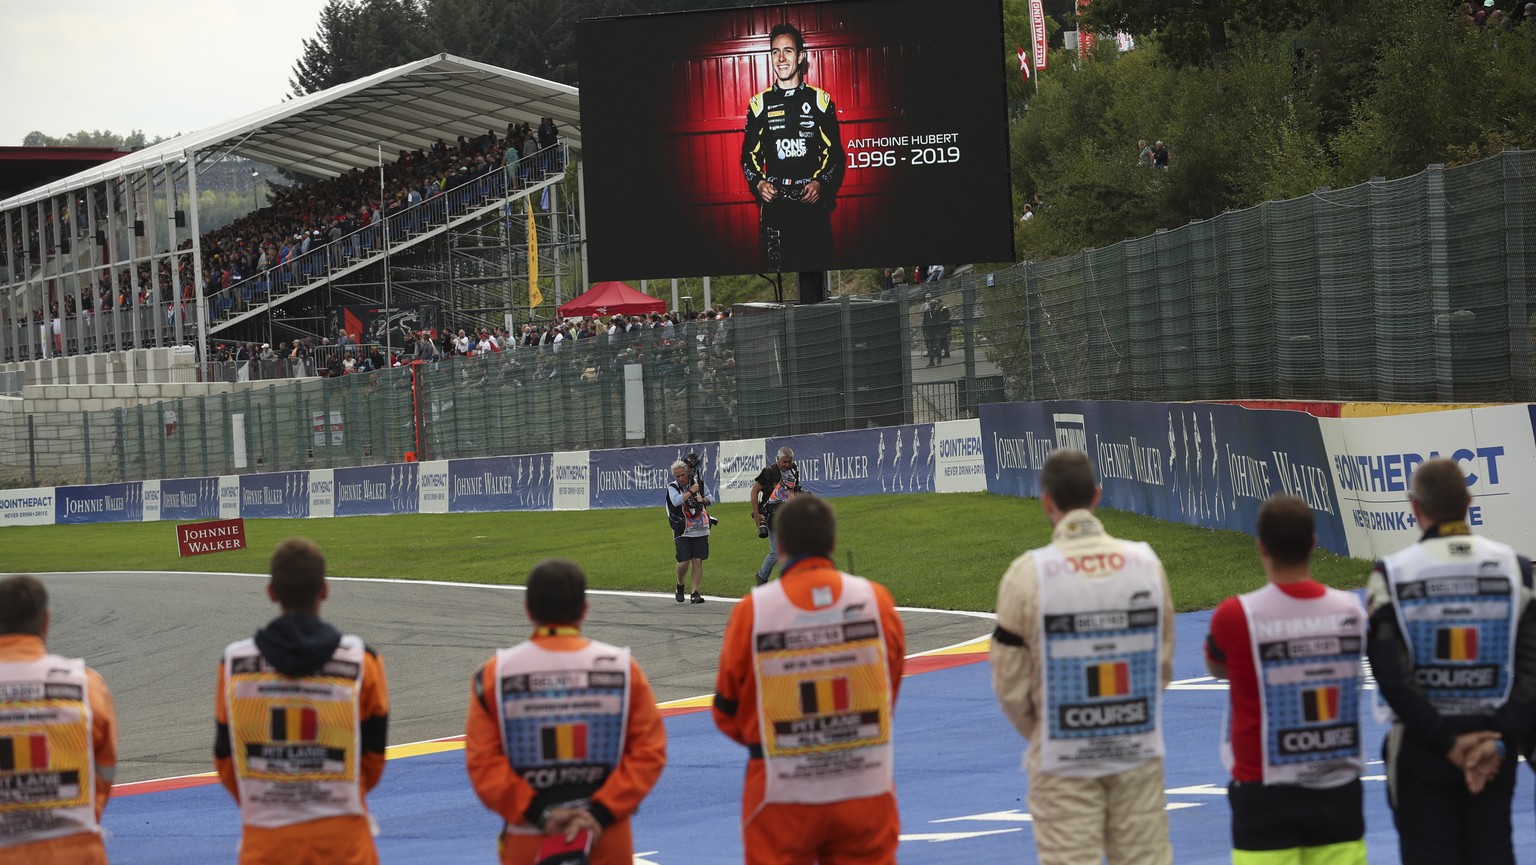 A large screen television shows Formula 2 driver Anthoine Hubert prior to the start of the Belgian Formula One Grand Prix in Spa-Francorchamps, Belgium, Sunday, Sept. 1, 2019. The 22-year-old Hubert d ...